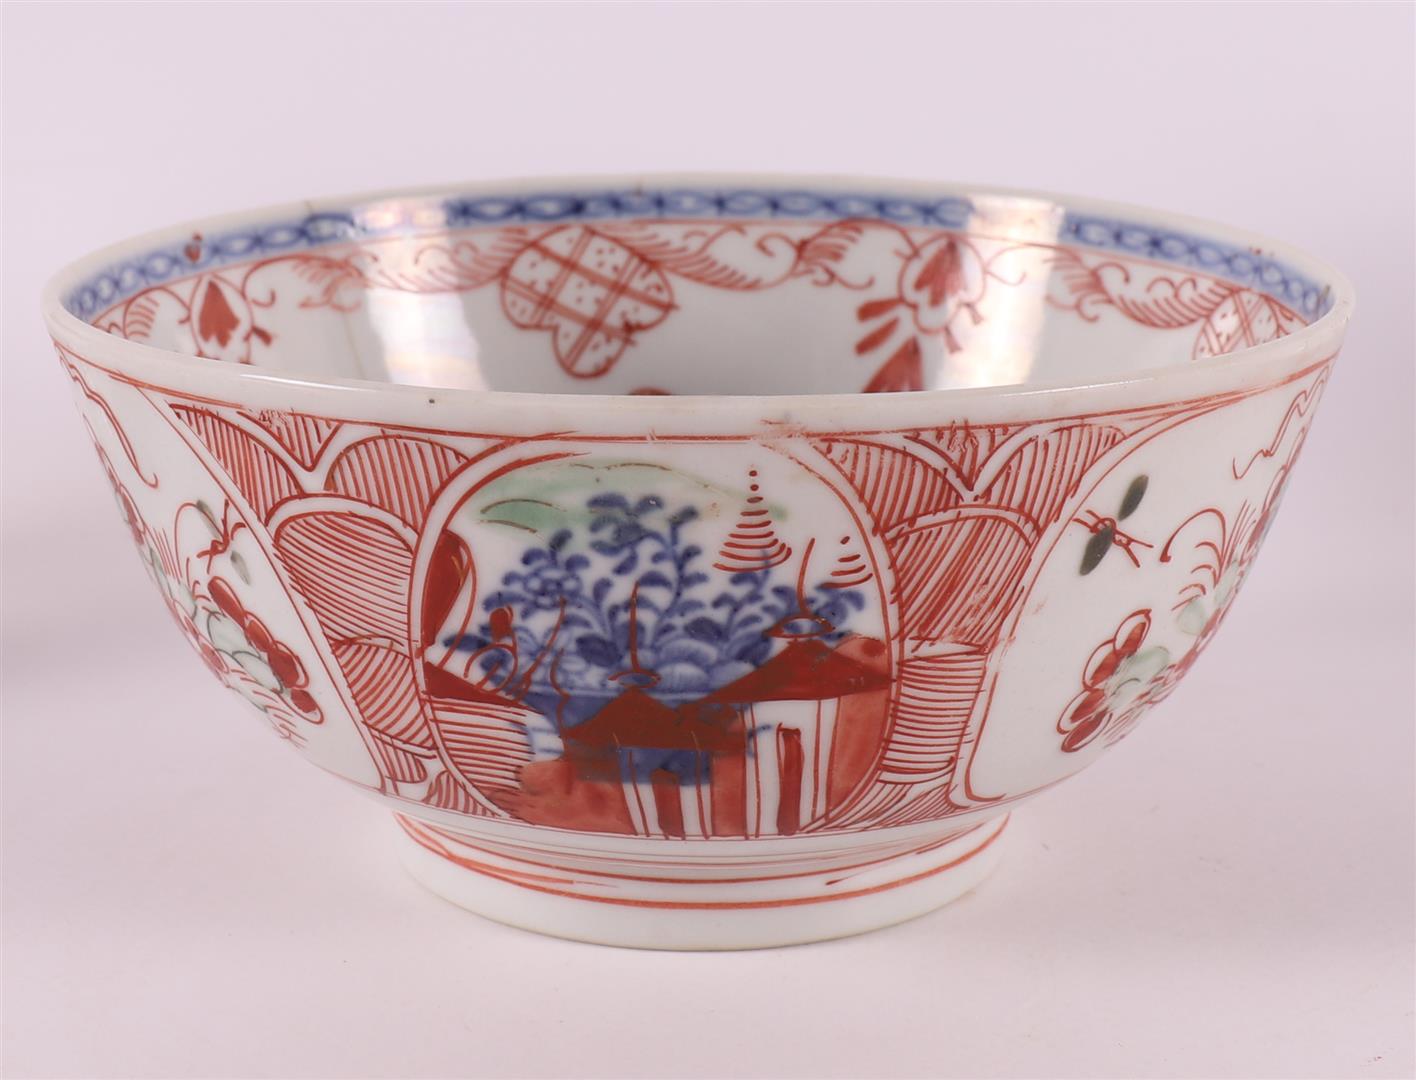 An Amsterdam colorful porcelain bowl, China, Qianglong, 18th century. Polychrome decoration of - Image 5 of 20